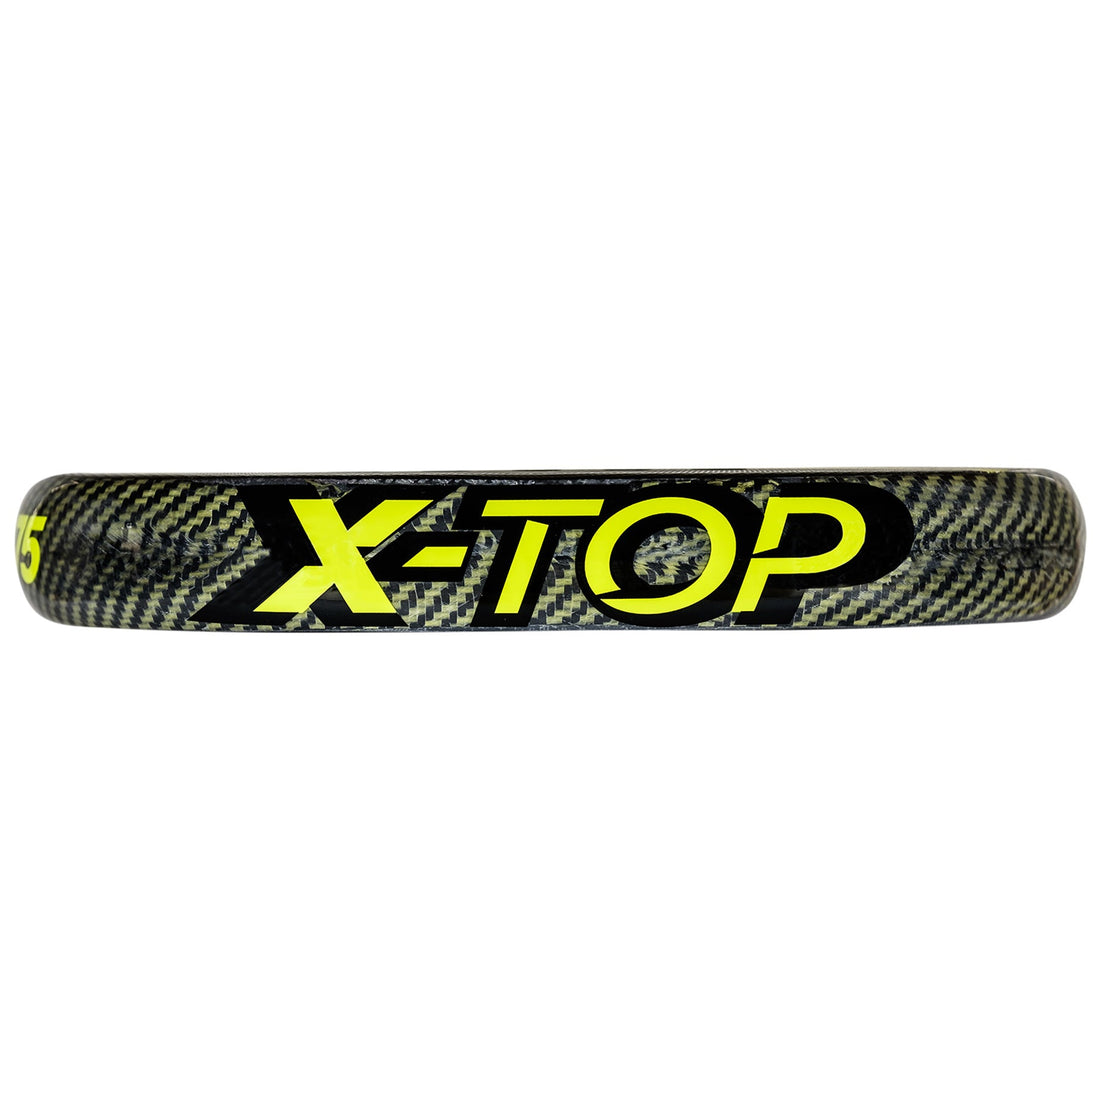 Tecnifibre Wall Breaker X-Top 365 with Innovative X-TOP Technology